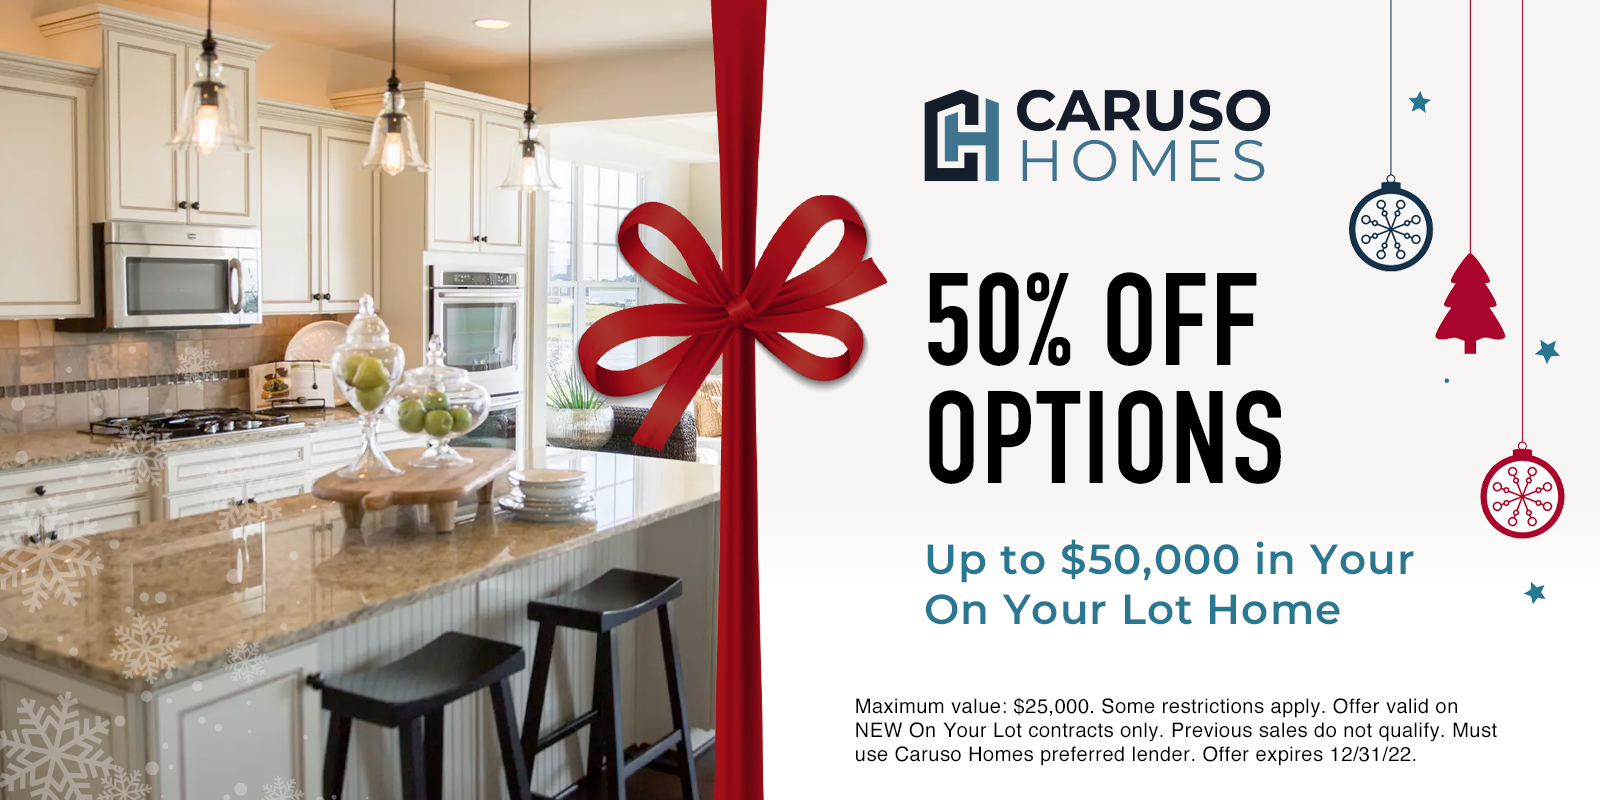 Caruso Homes 50% OFF
                    Options - Up to $50,000 in Your On Your Lot Home